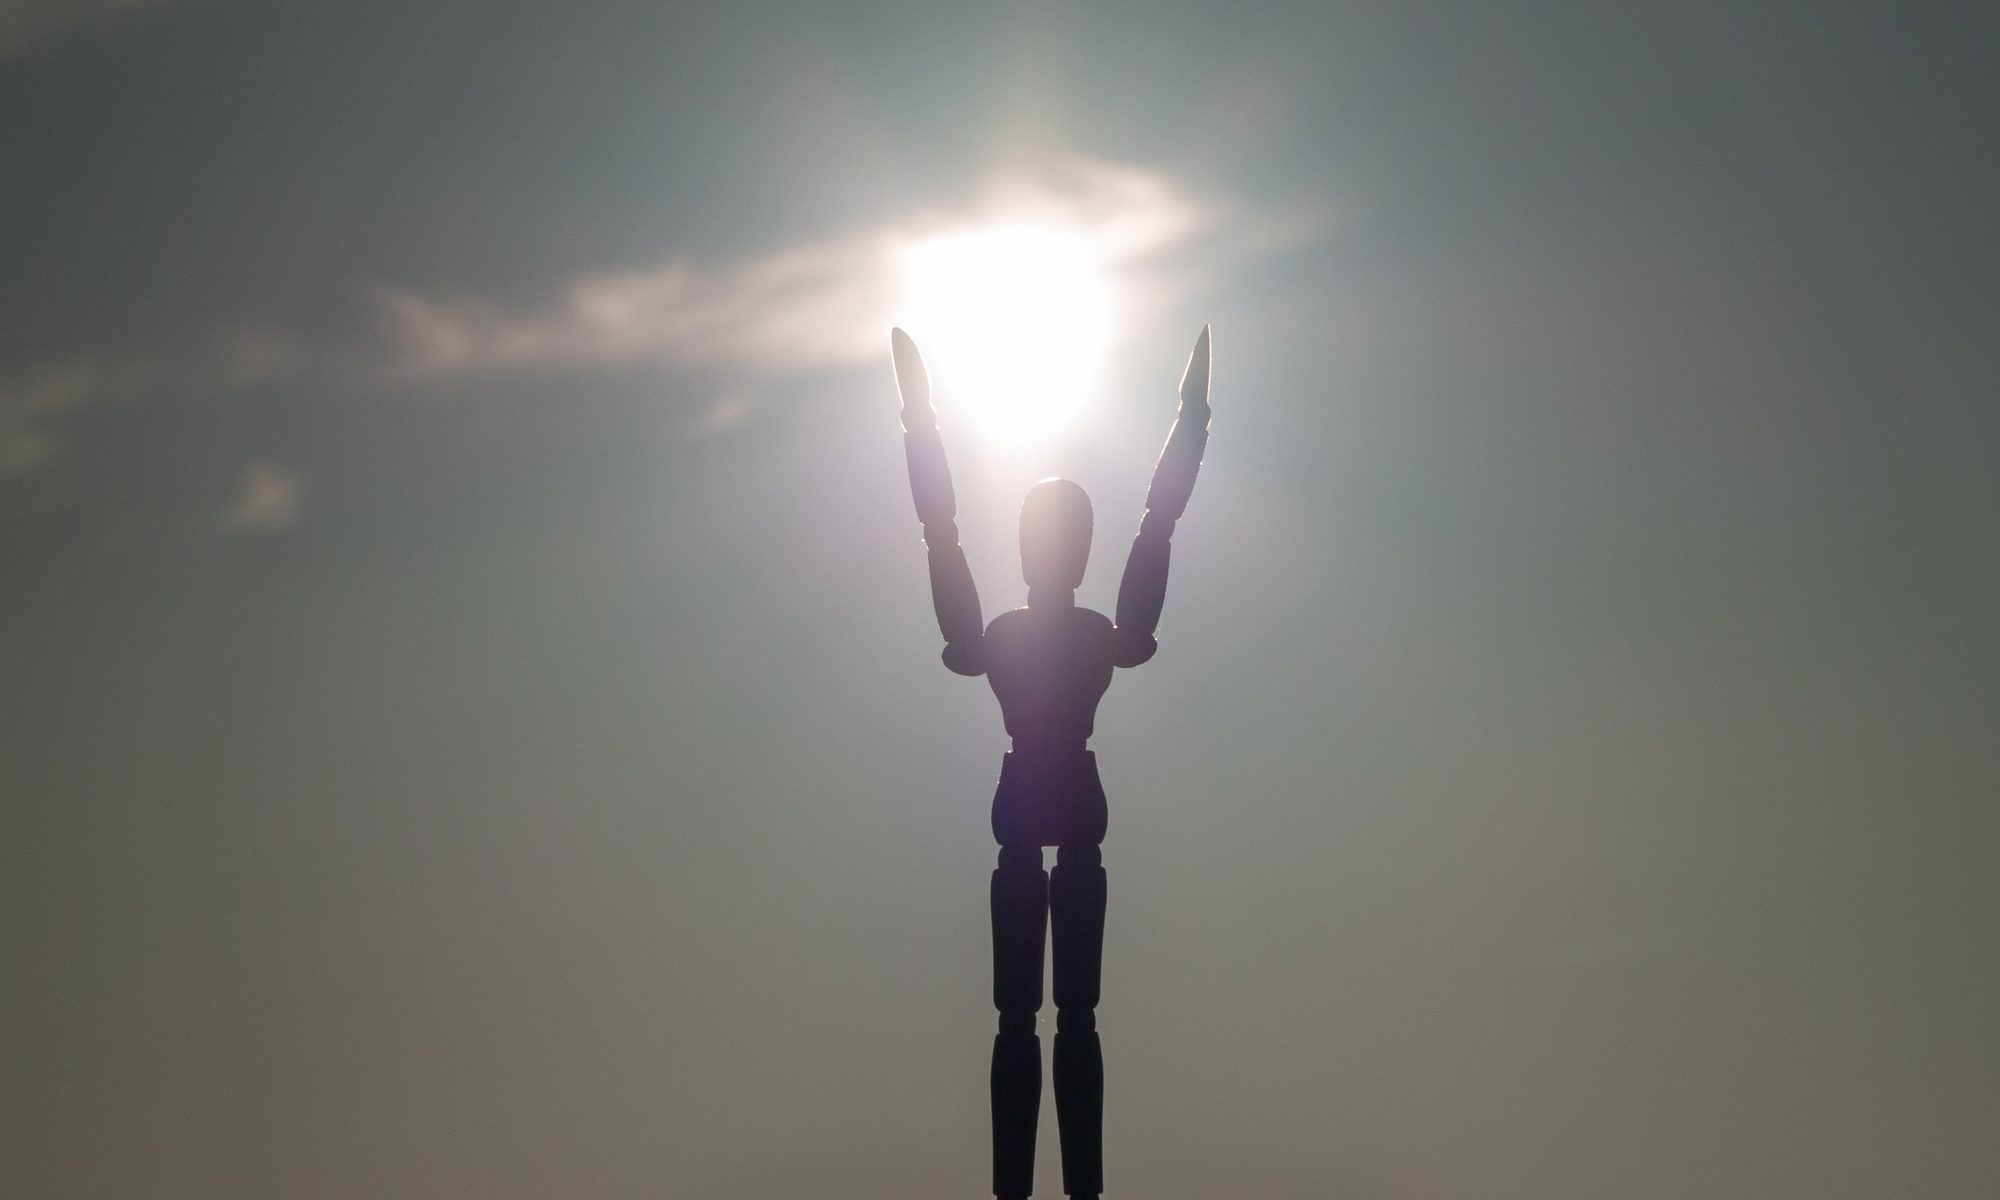 photograph of wooden figurine arms outstretched to sun